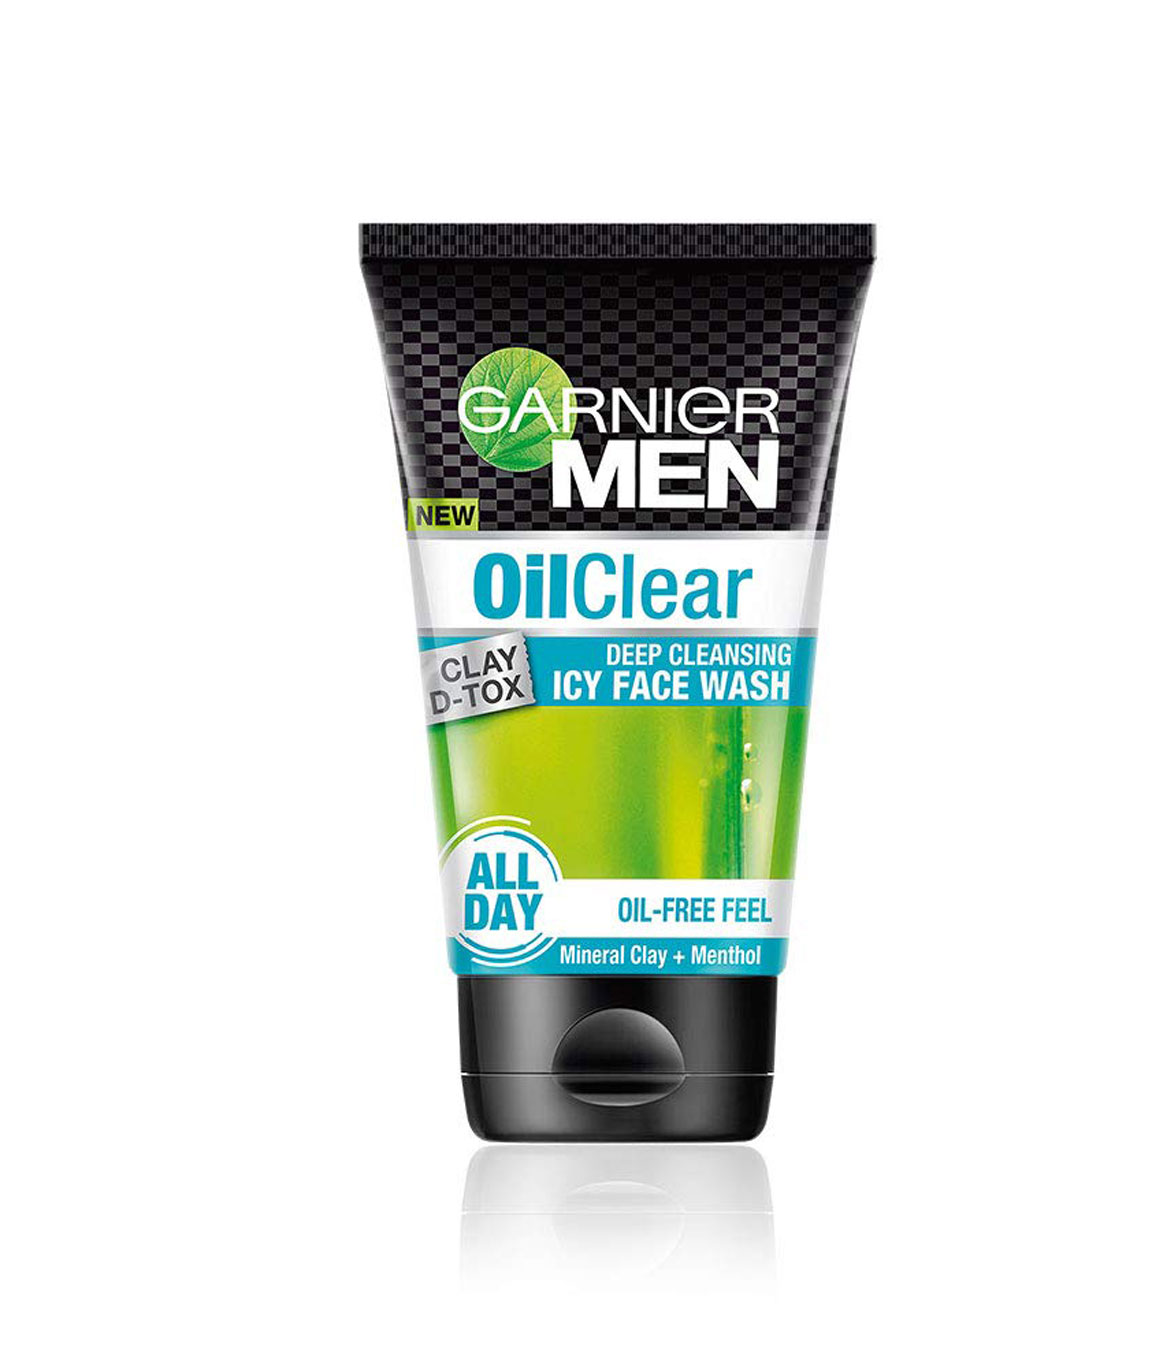 Garnier Men Oil Clear Clay D-Tox Deep Cleansing Icy Face Wash, 100gm